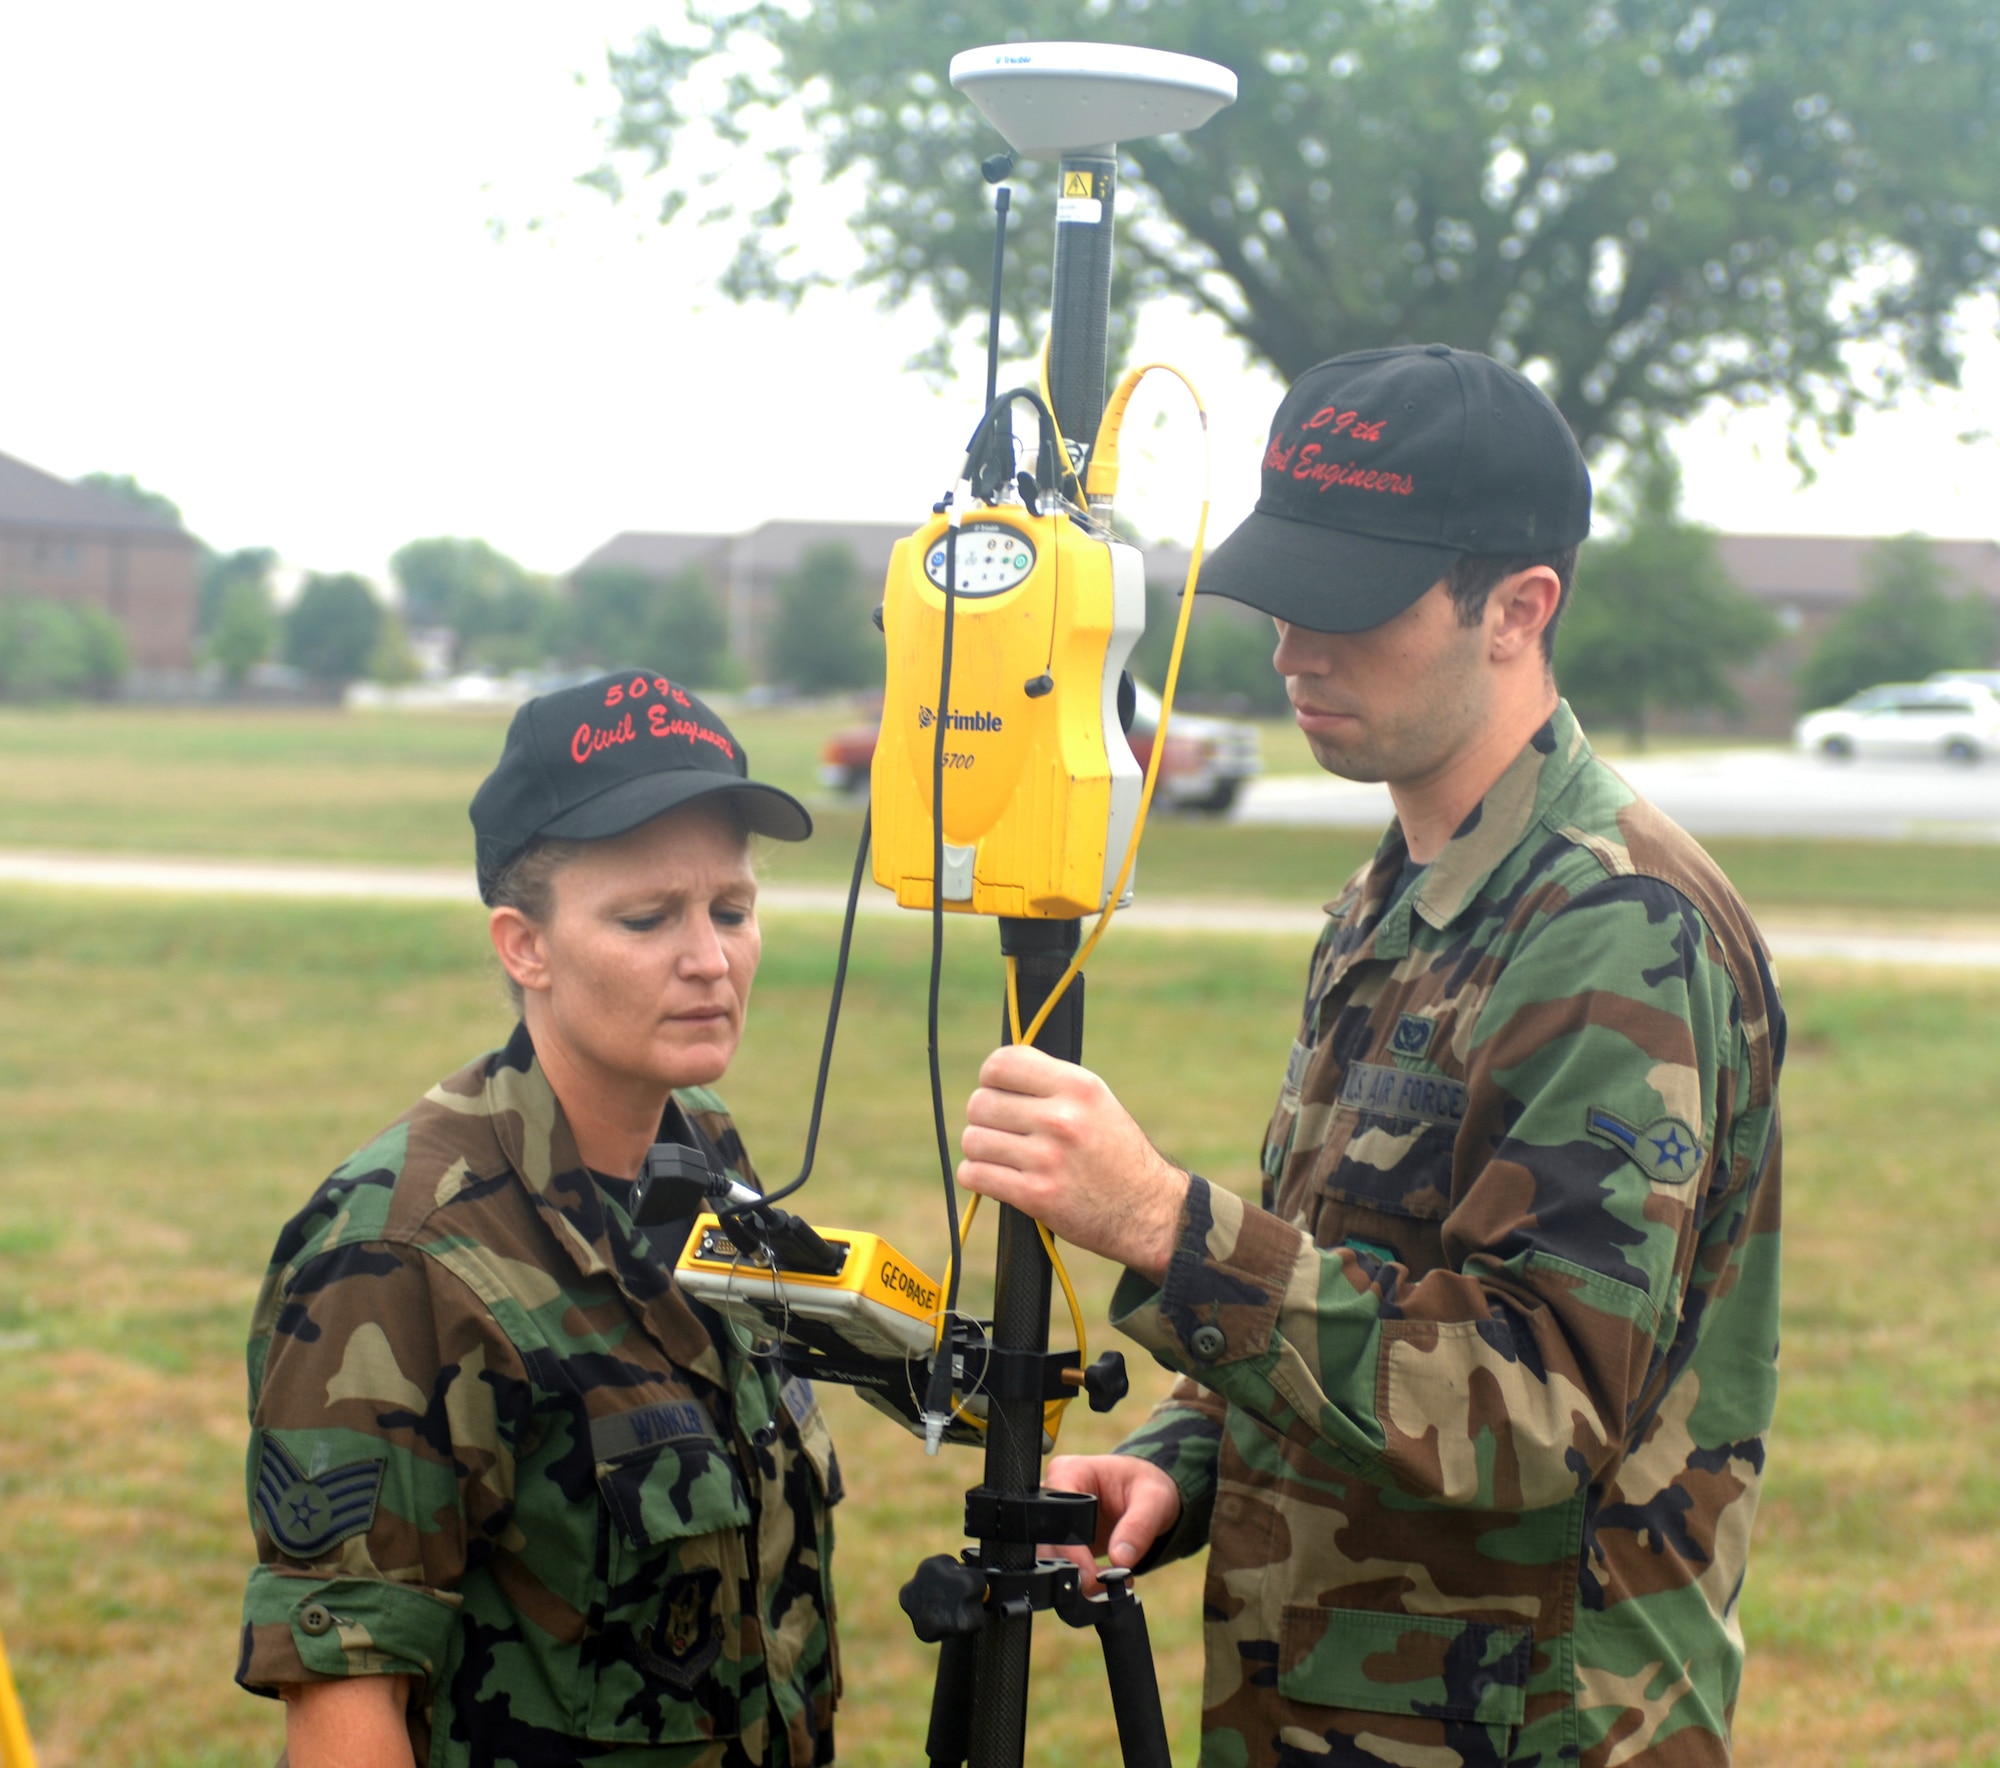 WHITEMAN AIR FORCE BASE, Mo. --  Staff Sgt. Clara Winkler and Airman Geoffrey Russel, 509th Bomb Wing Civil Engineer Squadron, set up a Trimble 5700 to survey numerous points around Skelton Lake Sept. 6. The information will be used to determine if a lake improvement project is possible. Winkler is a Reservist from the 442nd Fighter Wing currently on active duty with the 509th CES. (U.S. Air Force Photo/Tech. Sgt. Samuel A. Park)